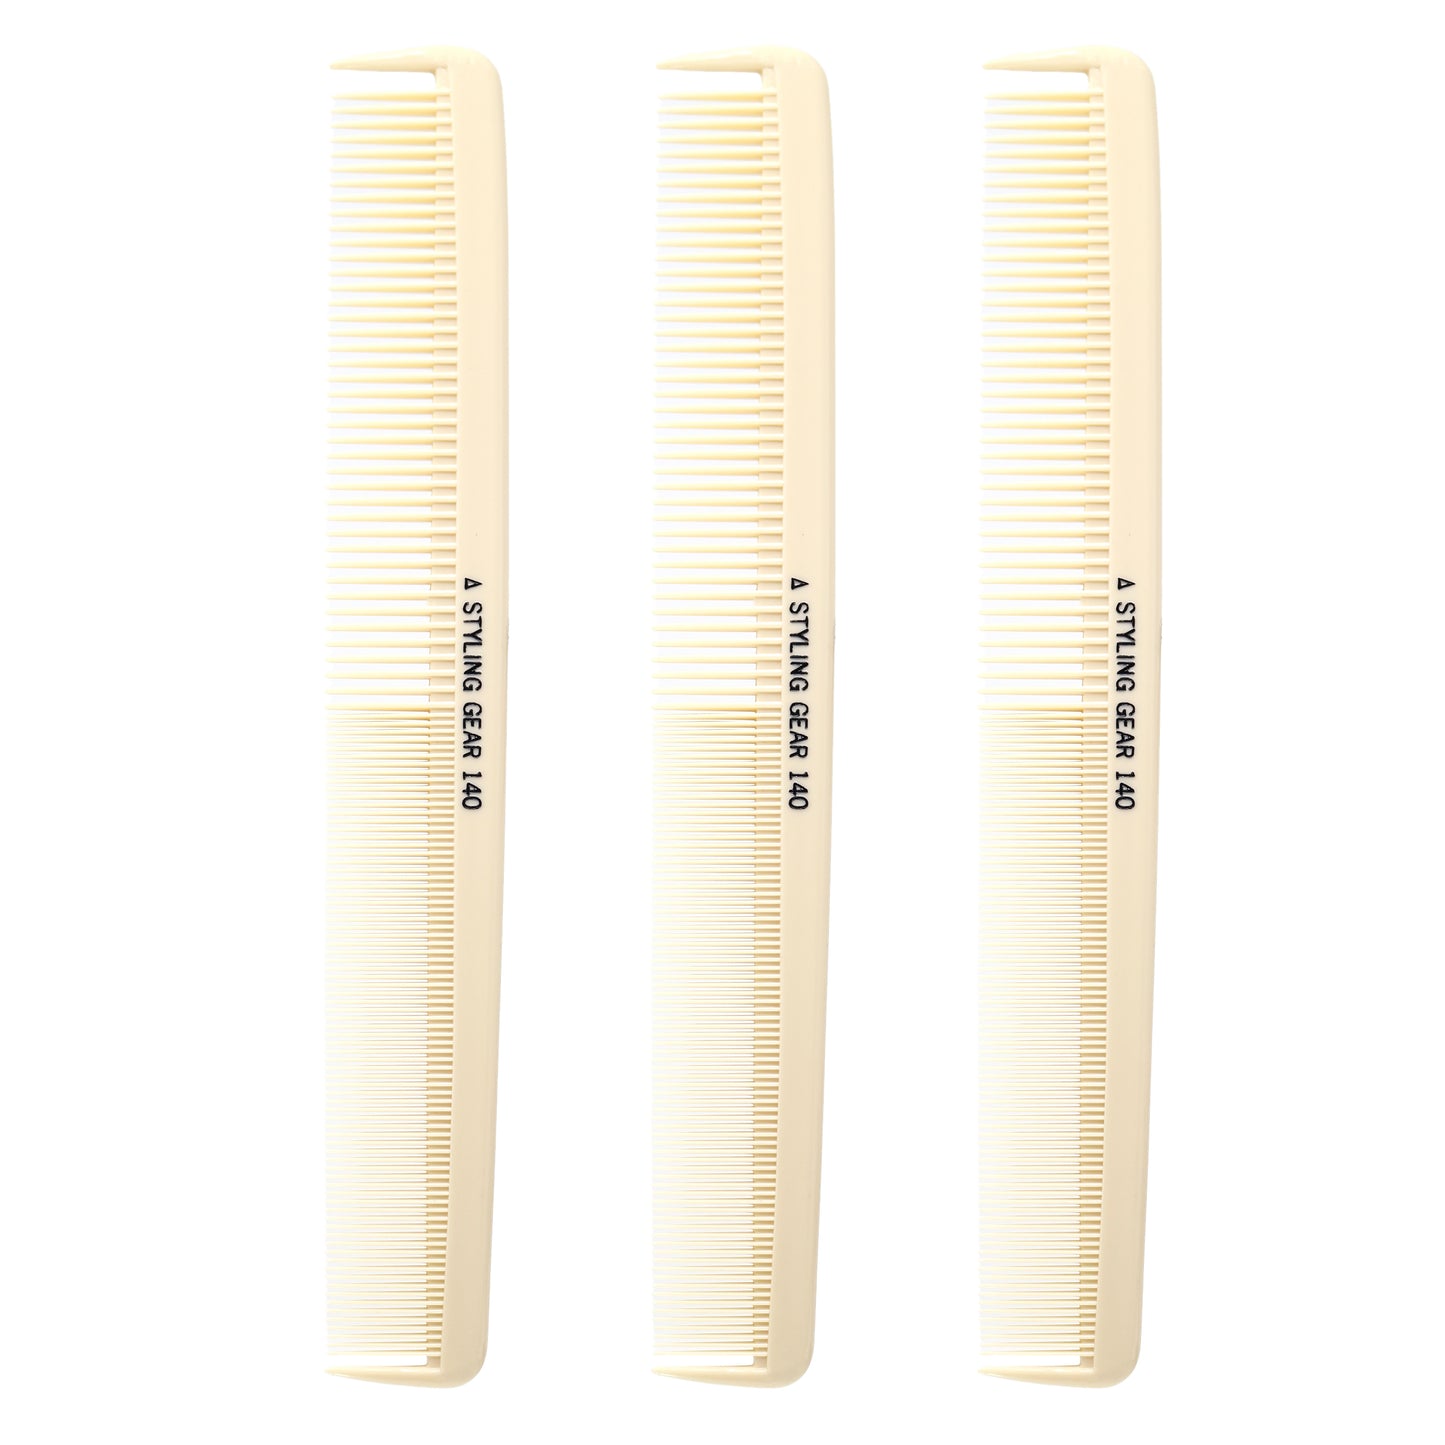 Styling Gear 140 Extra Large Barber Combs Hair Stylist Salon Barbershop Parting Combs Wide And Fine Teeth Beige